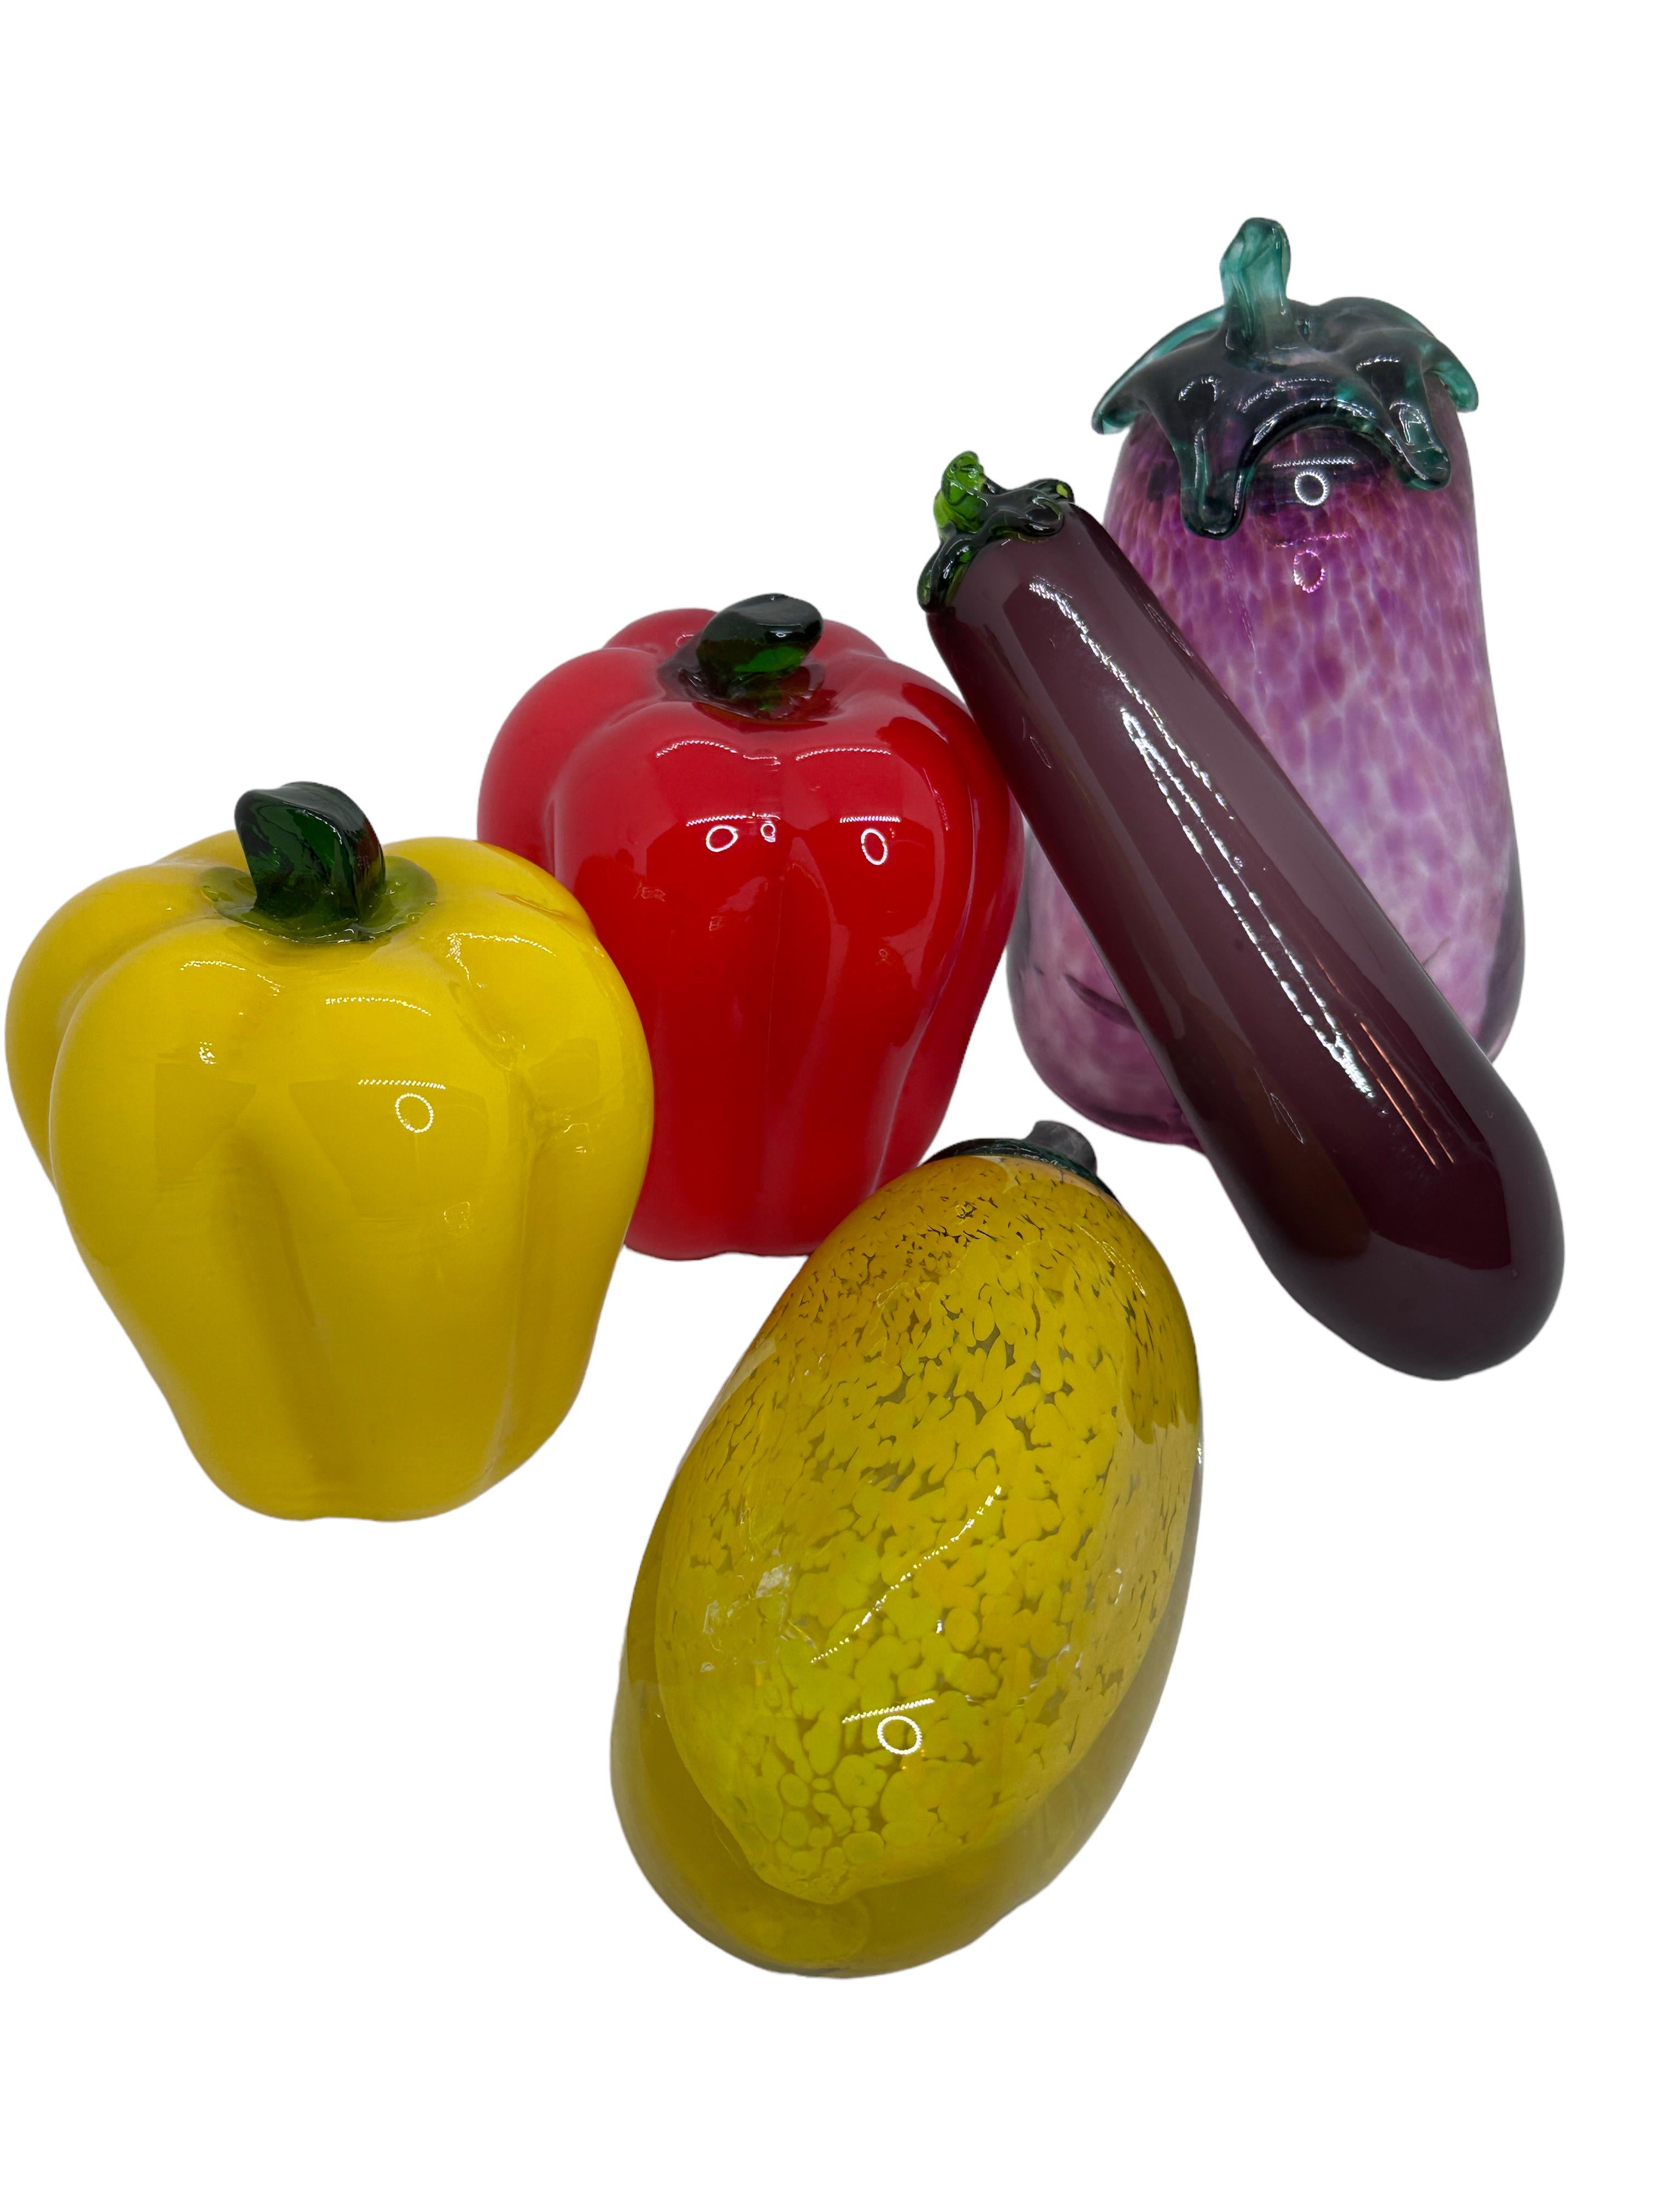 Beautiful Murano hand blown Italian art glass pieces. In the shape of fruits and vegetables. Colors are as seen in the pictures. A beautiful nice addition to your collection or to display in your home. The size given in dimensions section refers to